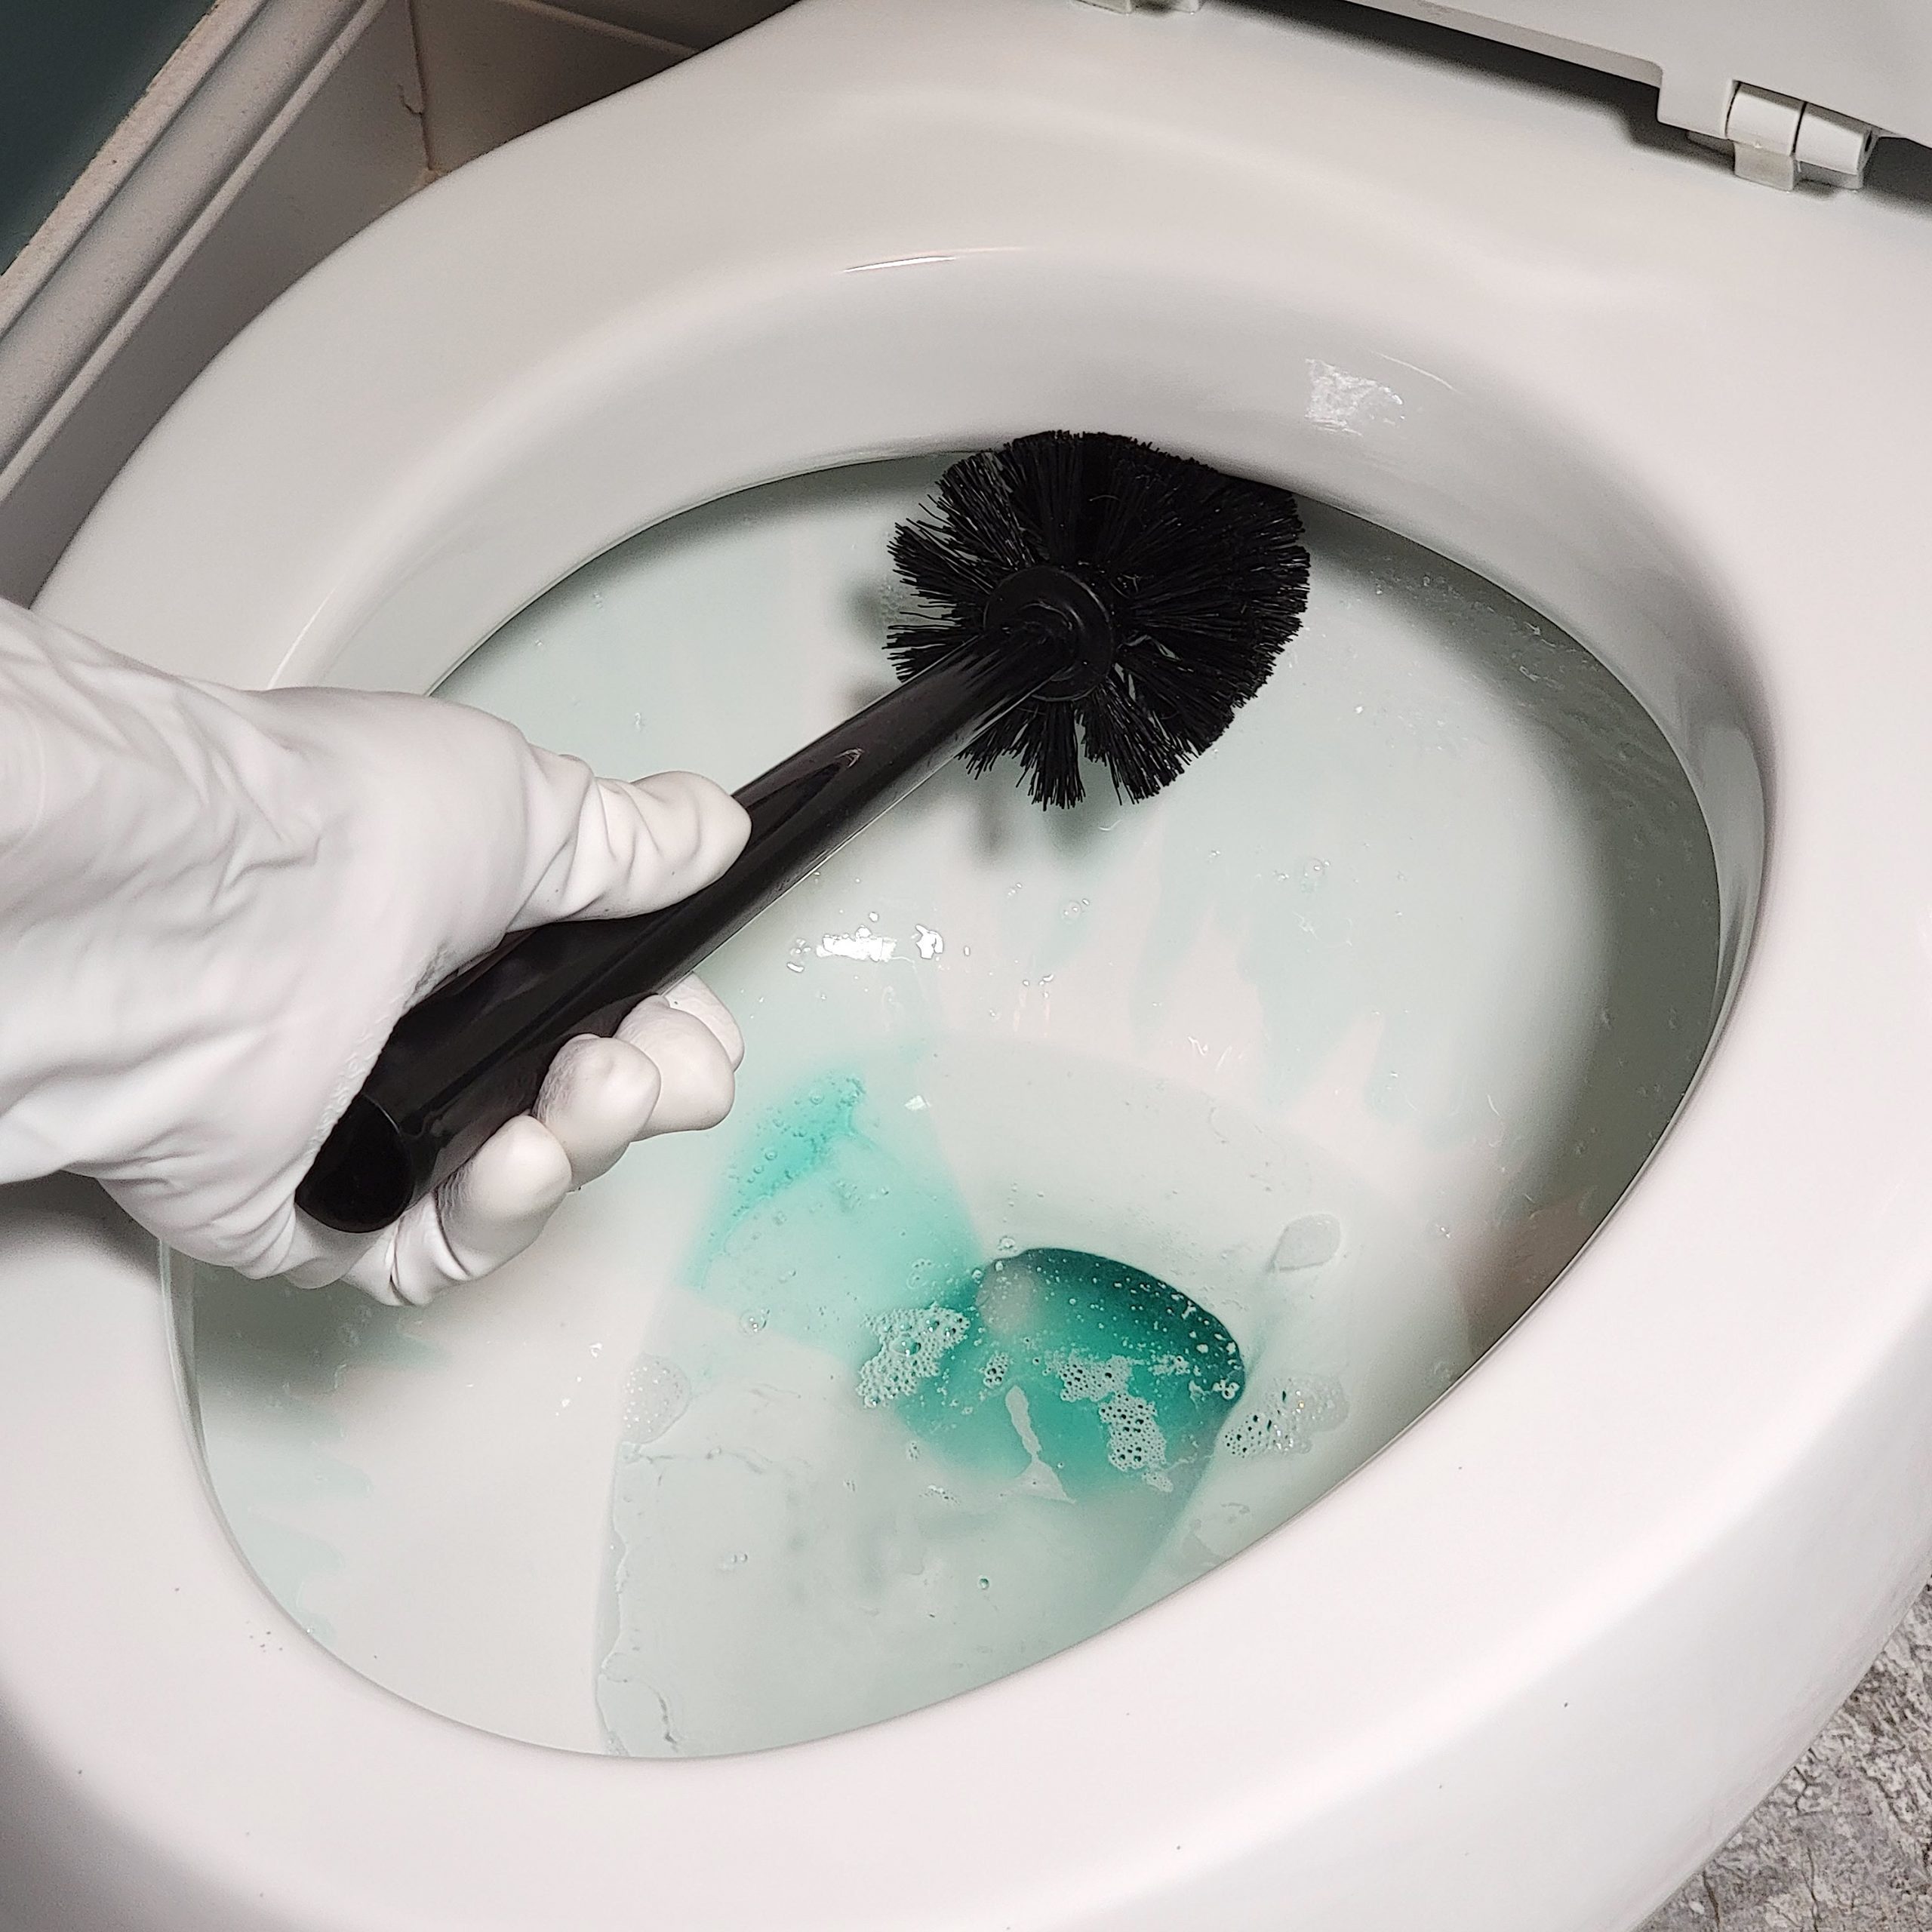 cleaning the toilet bowl with a toilet brush